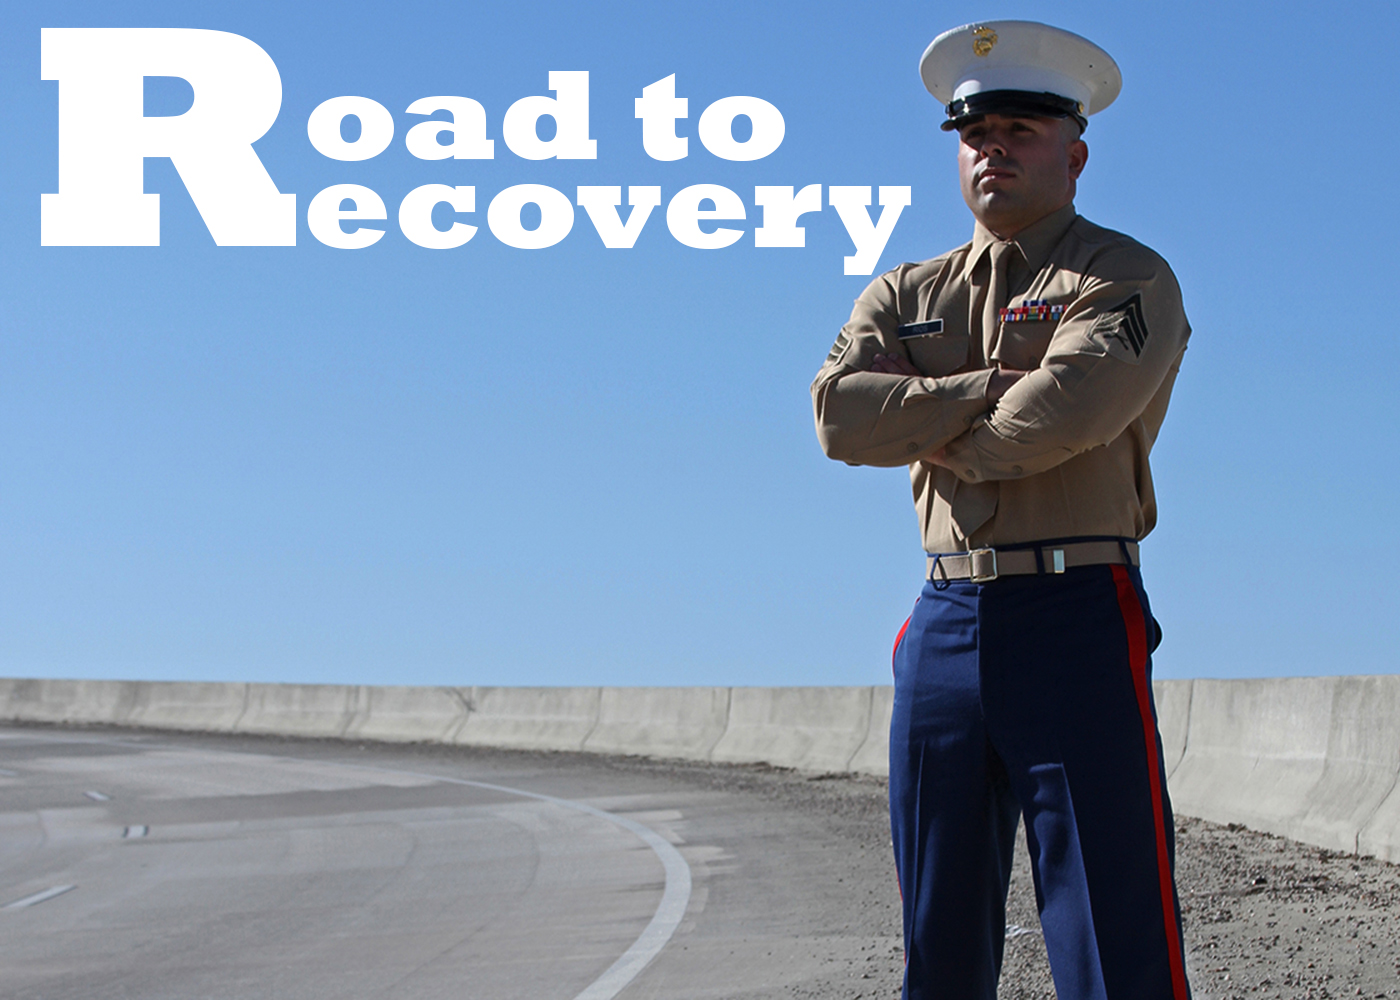 Sgt. Landon Rios, a canvassing recruiter with Recruiting Substation Augusta, Recruiting Station Columbia, stands on a bypass in the city of Augusta, Ga., on Dec. 17. Rios suffered severe injuries following a motorcycle accident at this location on June 20. (Marine Corps Photo by Sgt. Aaron Rooks)